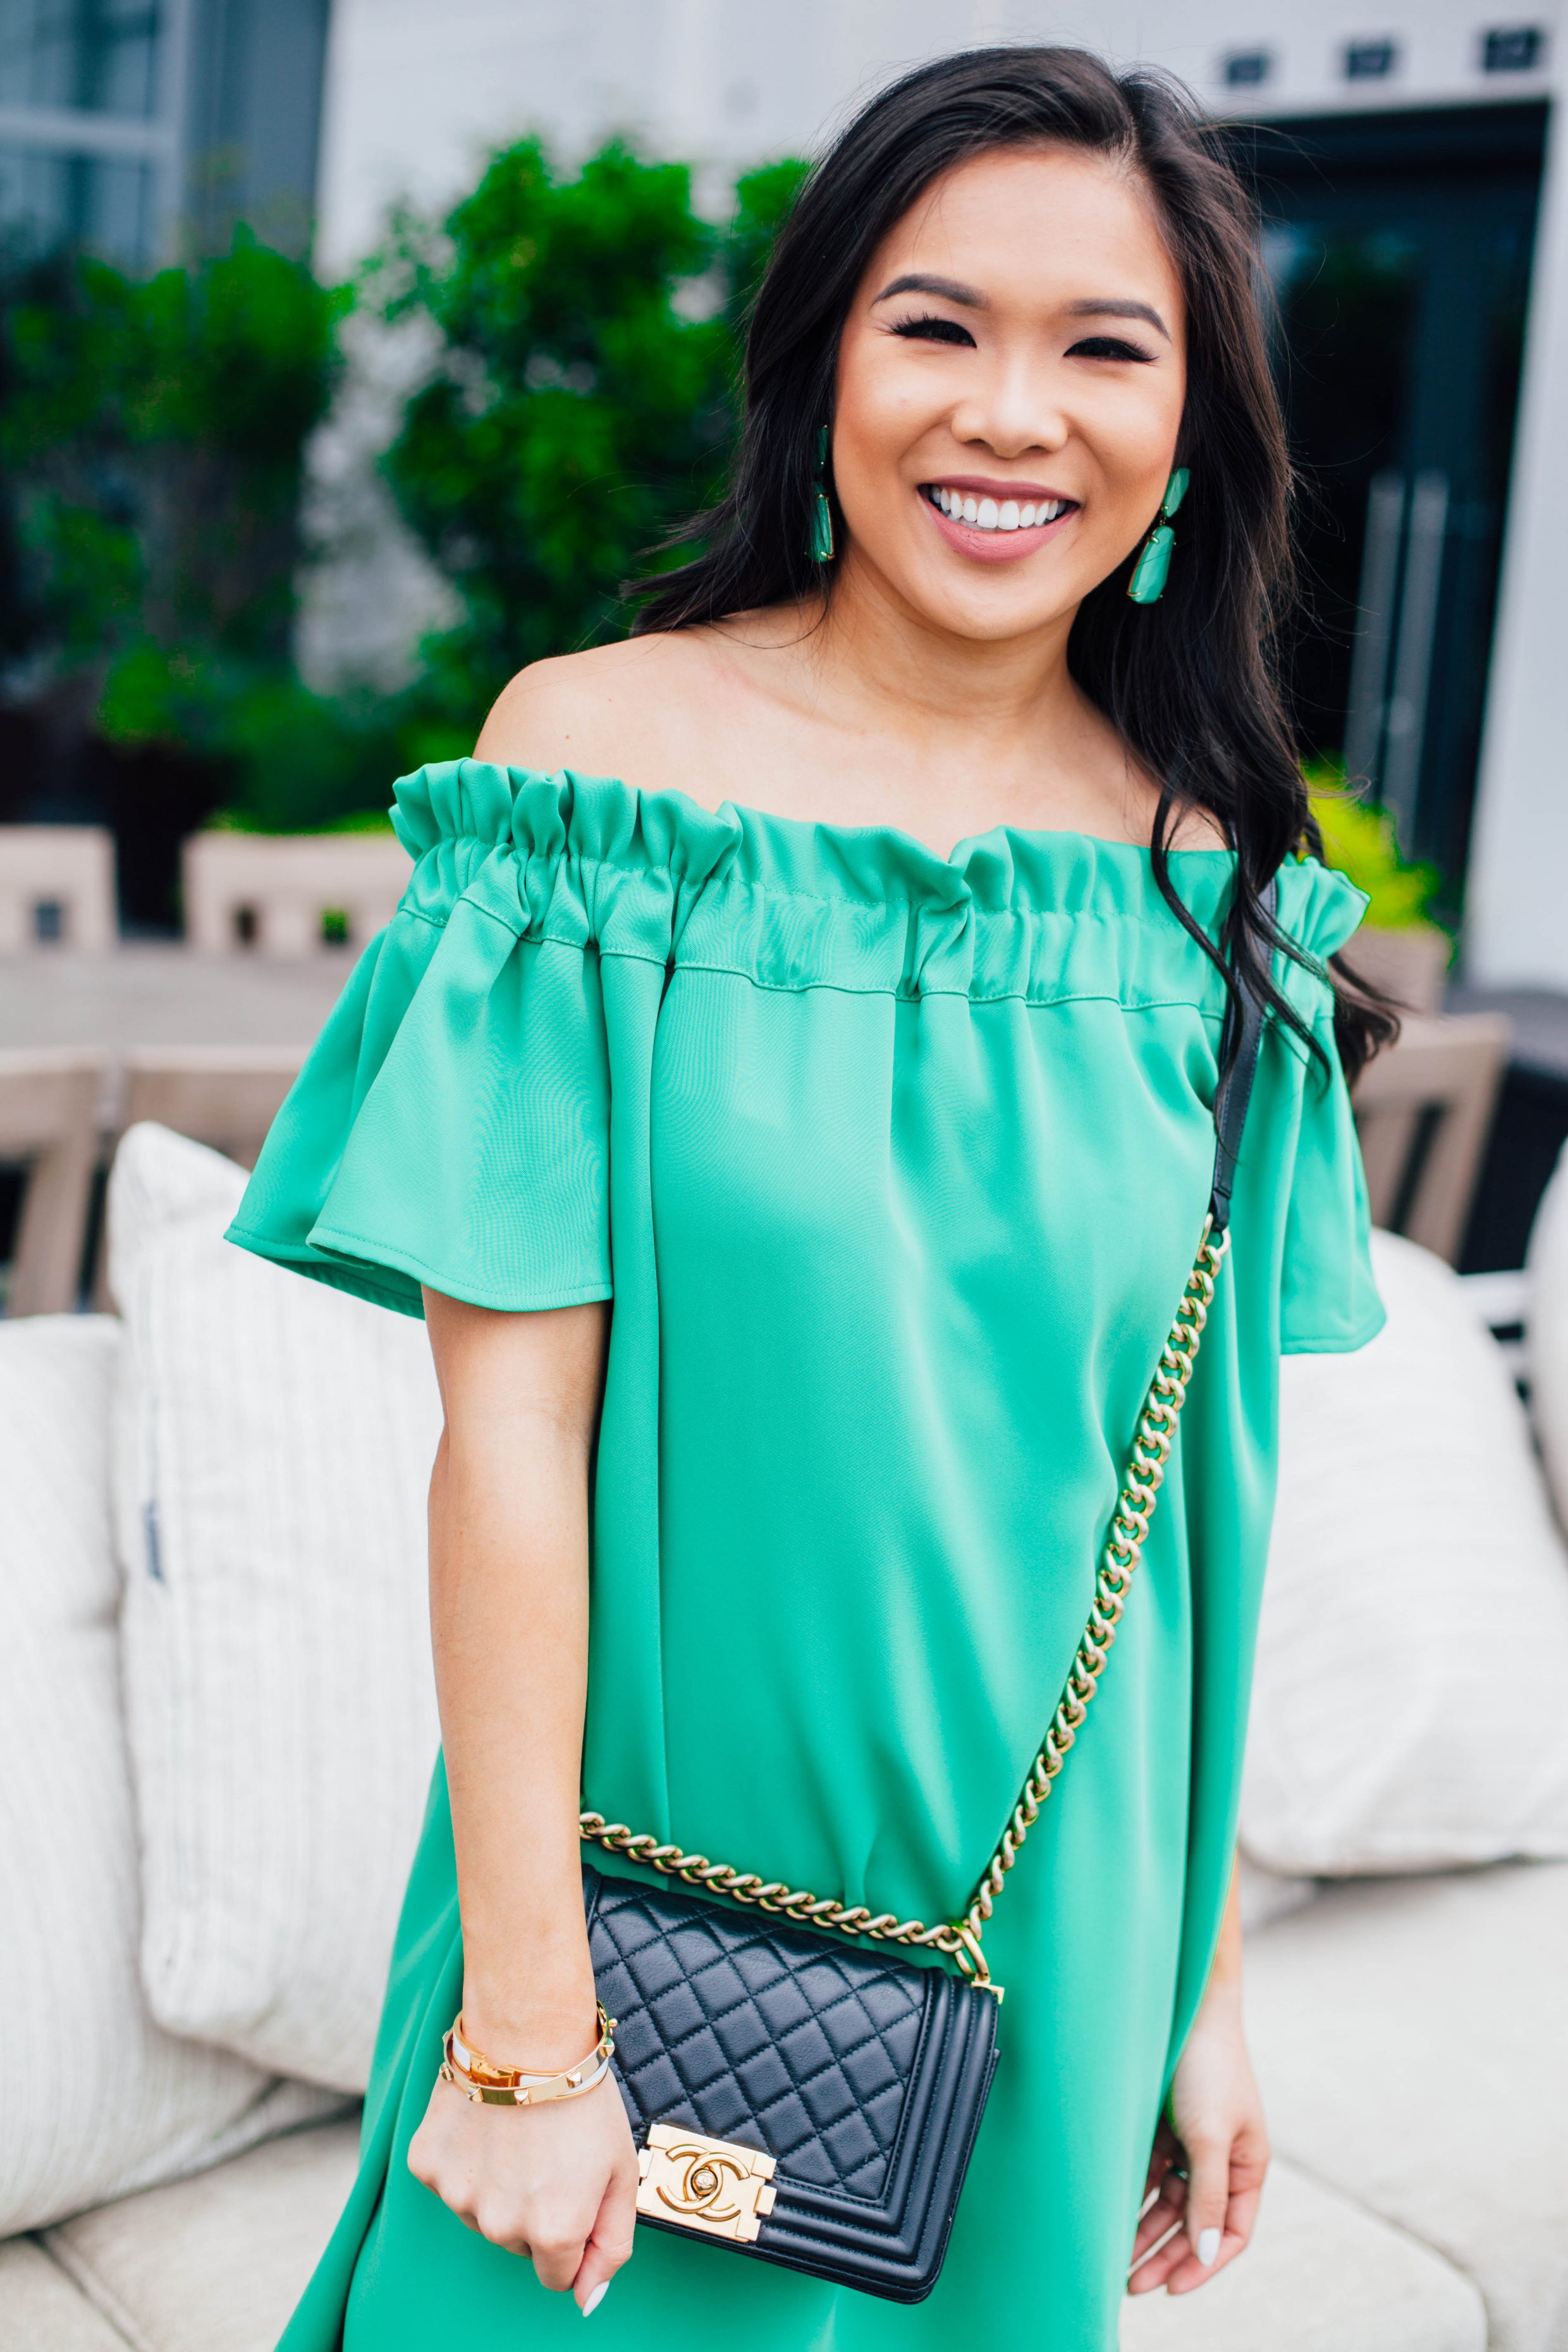 Must-Have Dress for Summer :: Ruffled + Affordable - Color & Chic